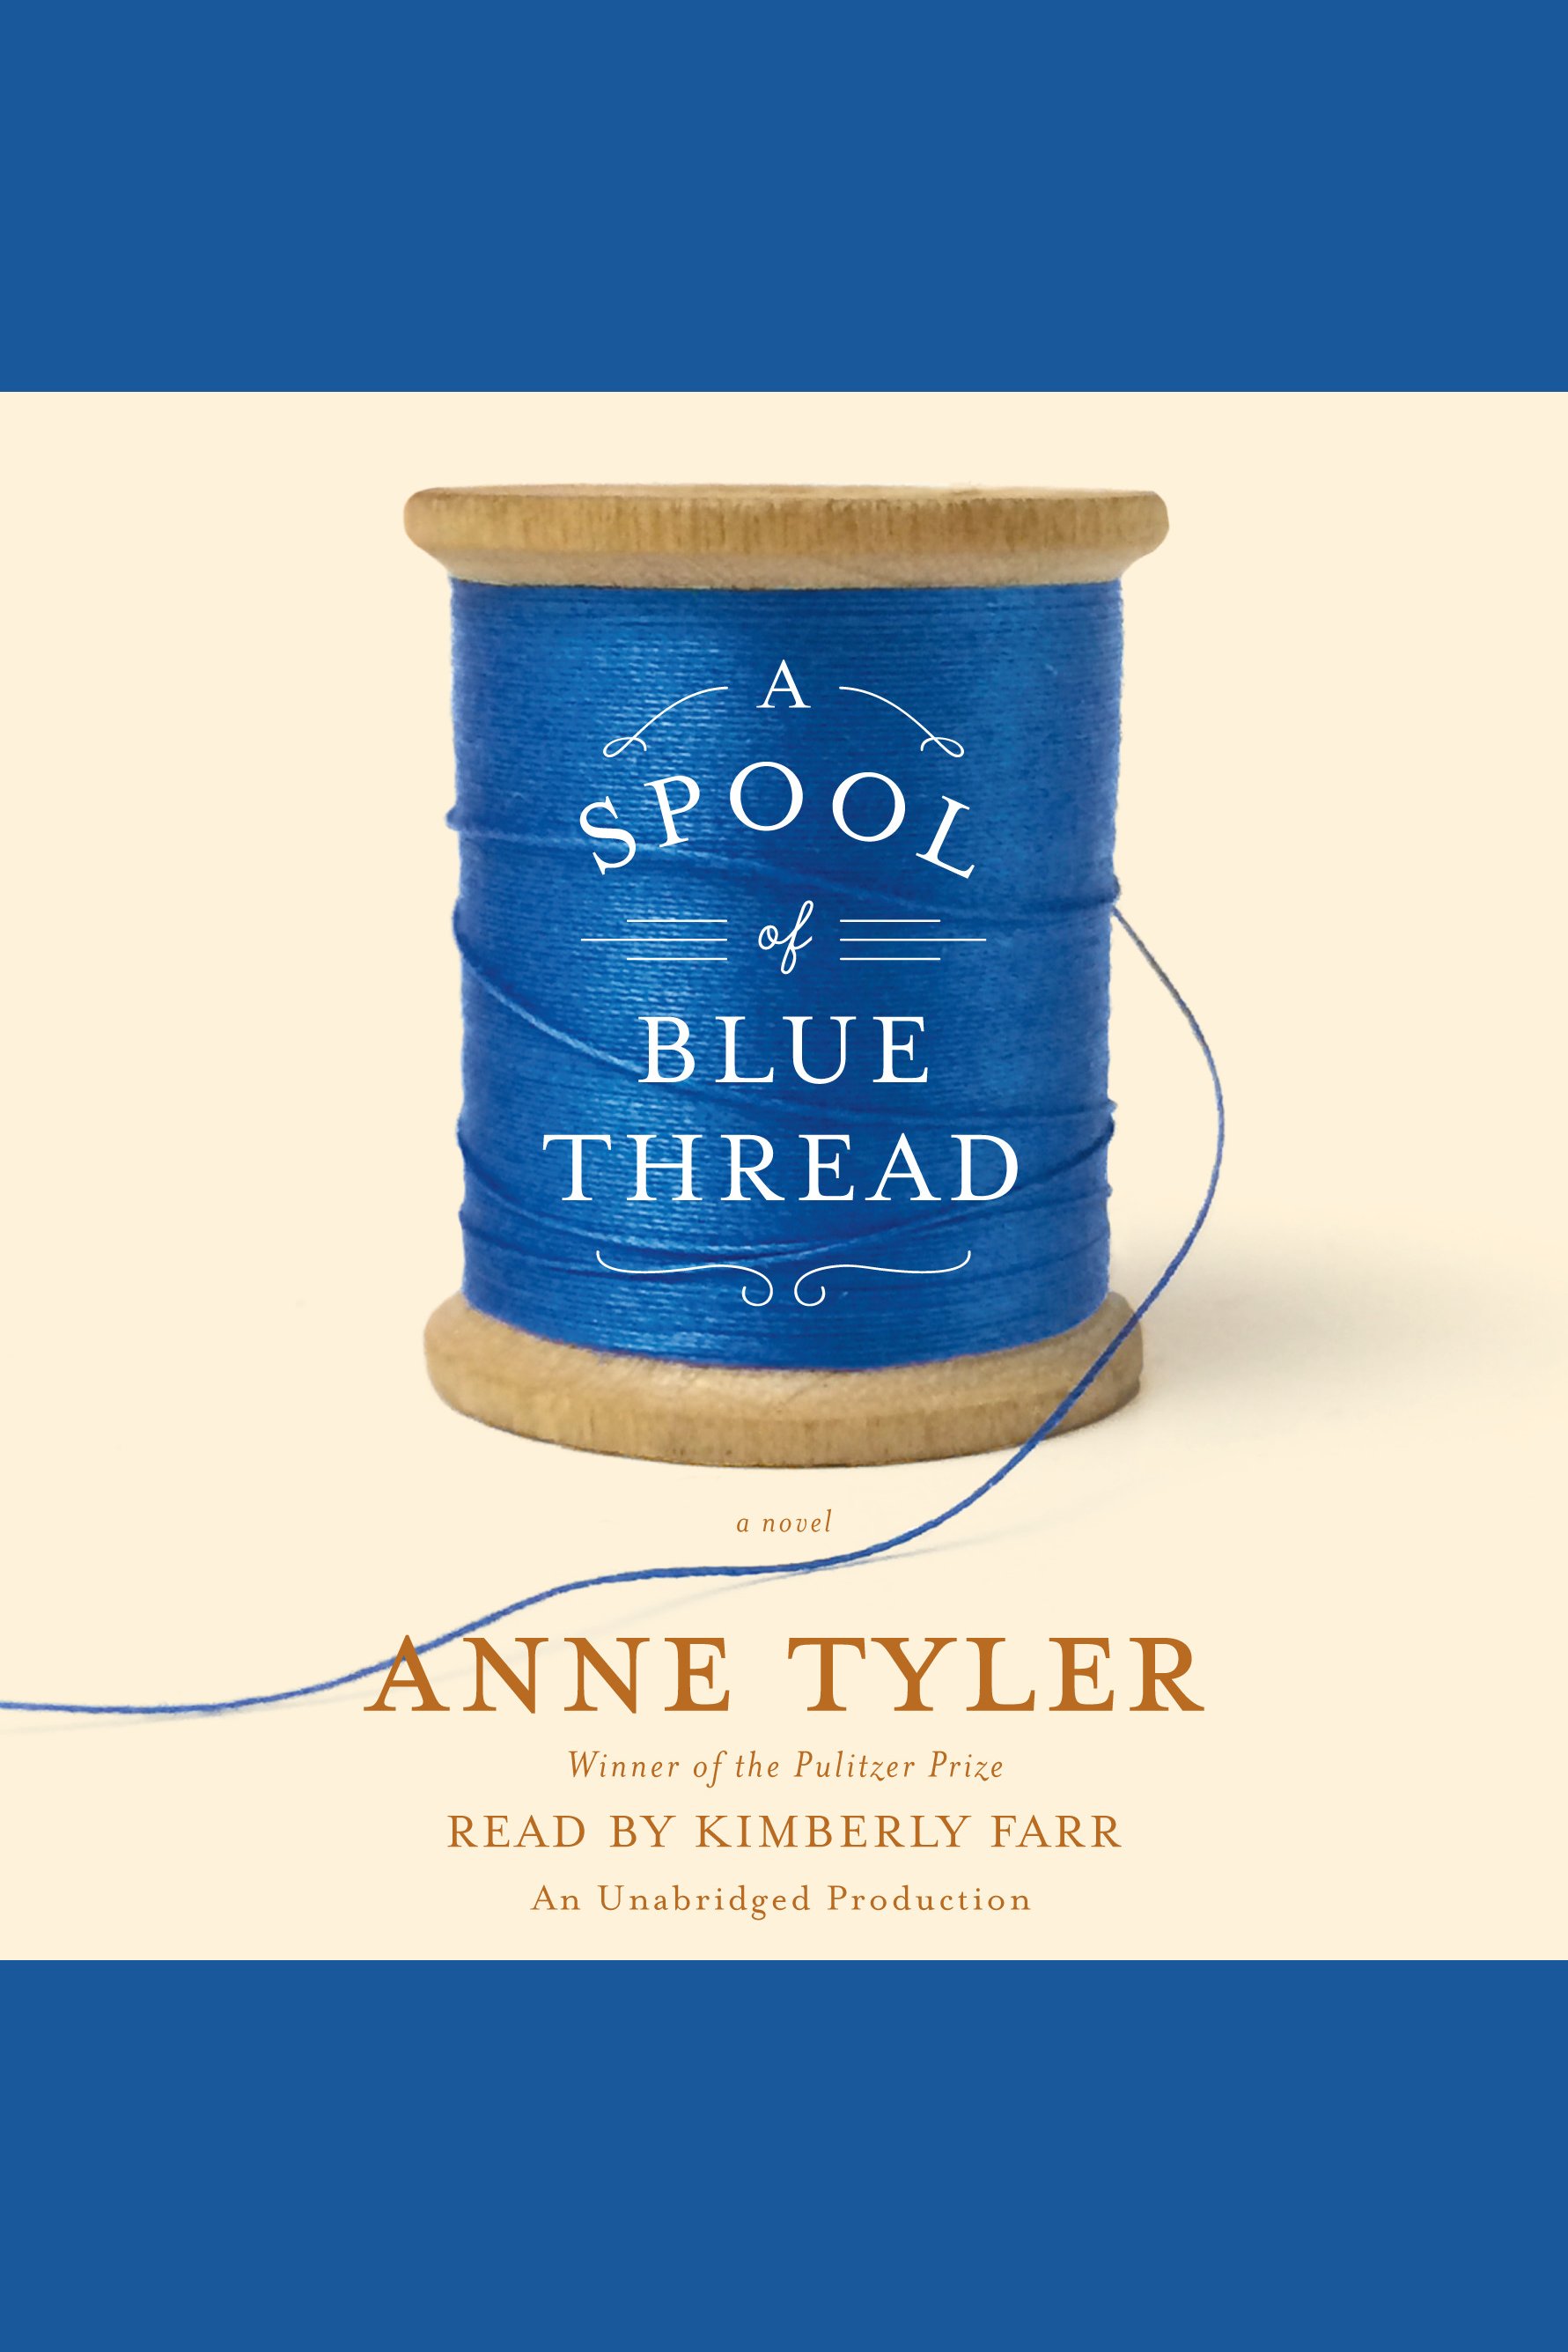 A spool of blue thread cover image